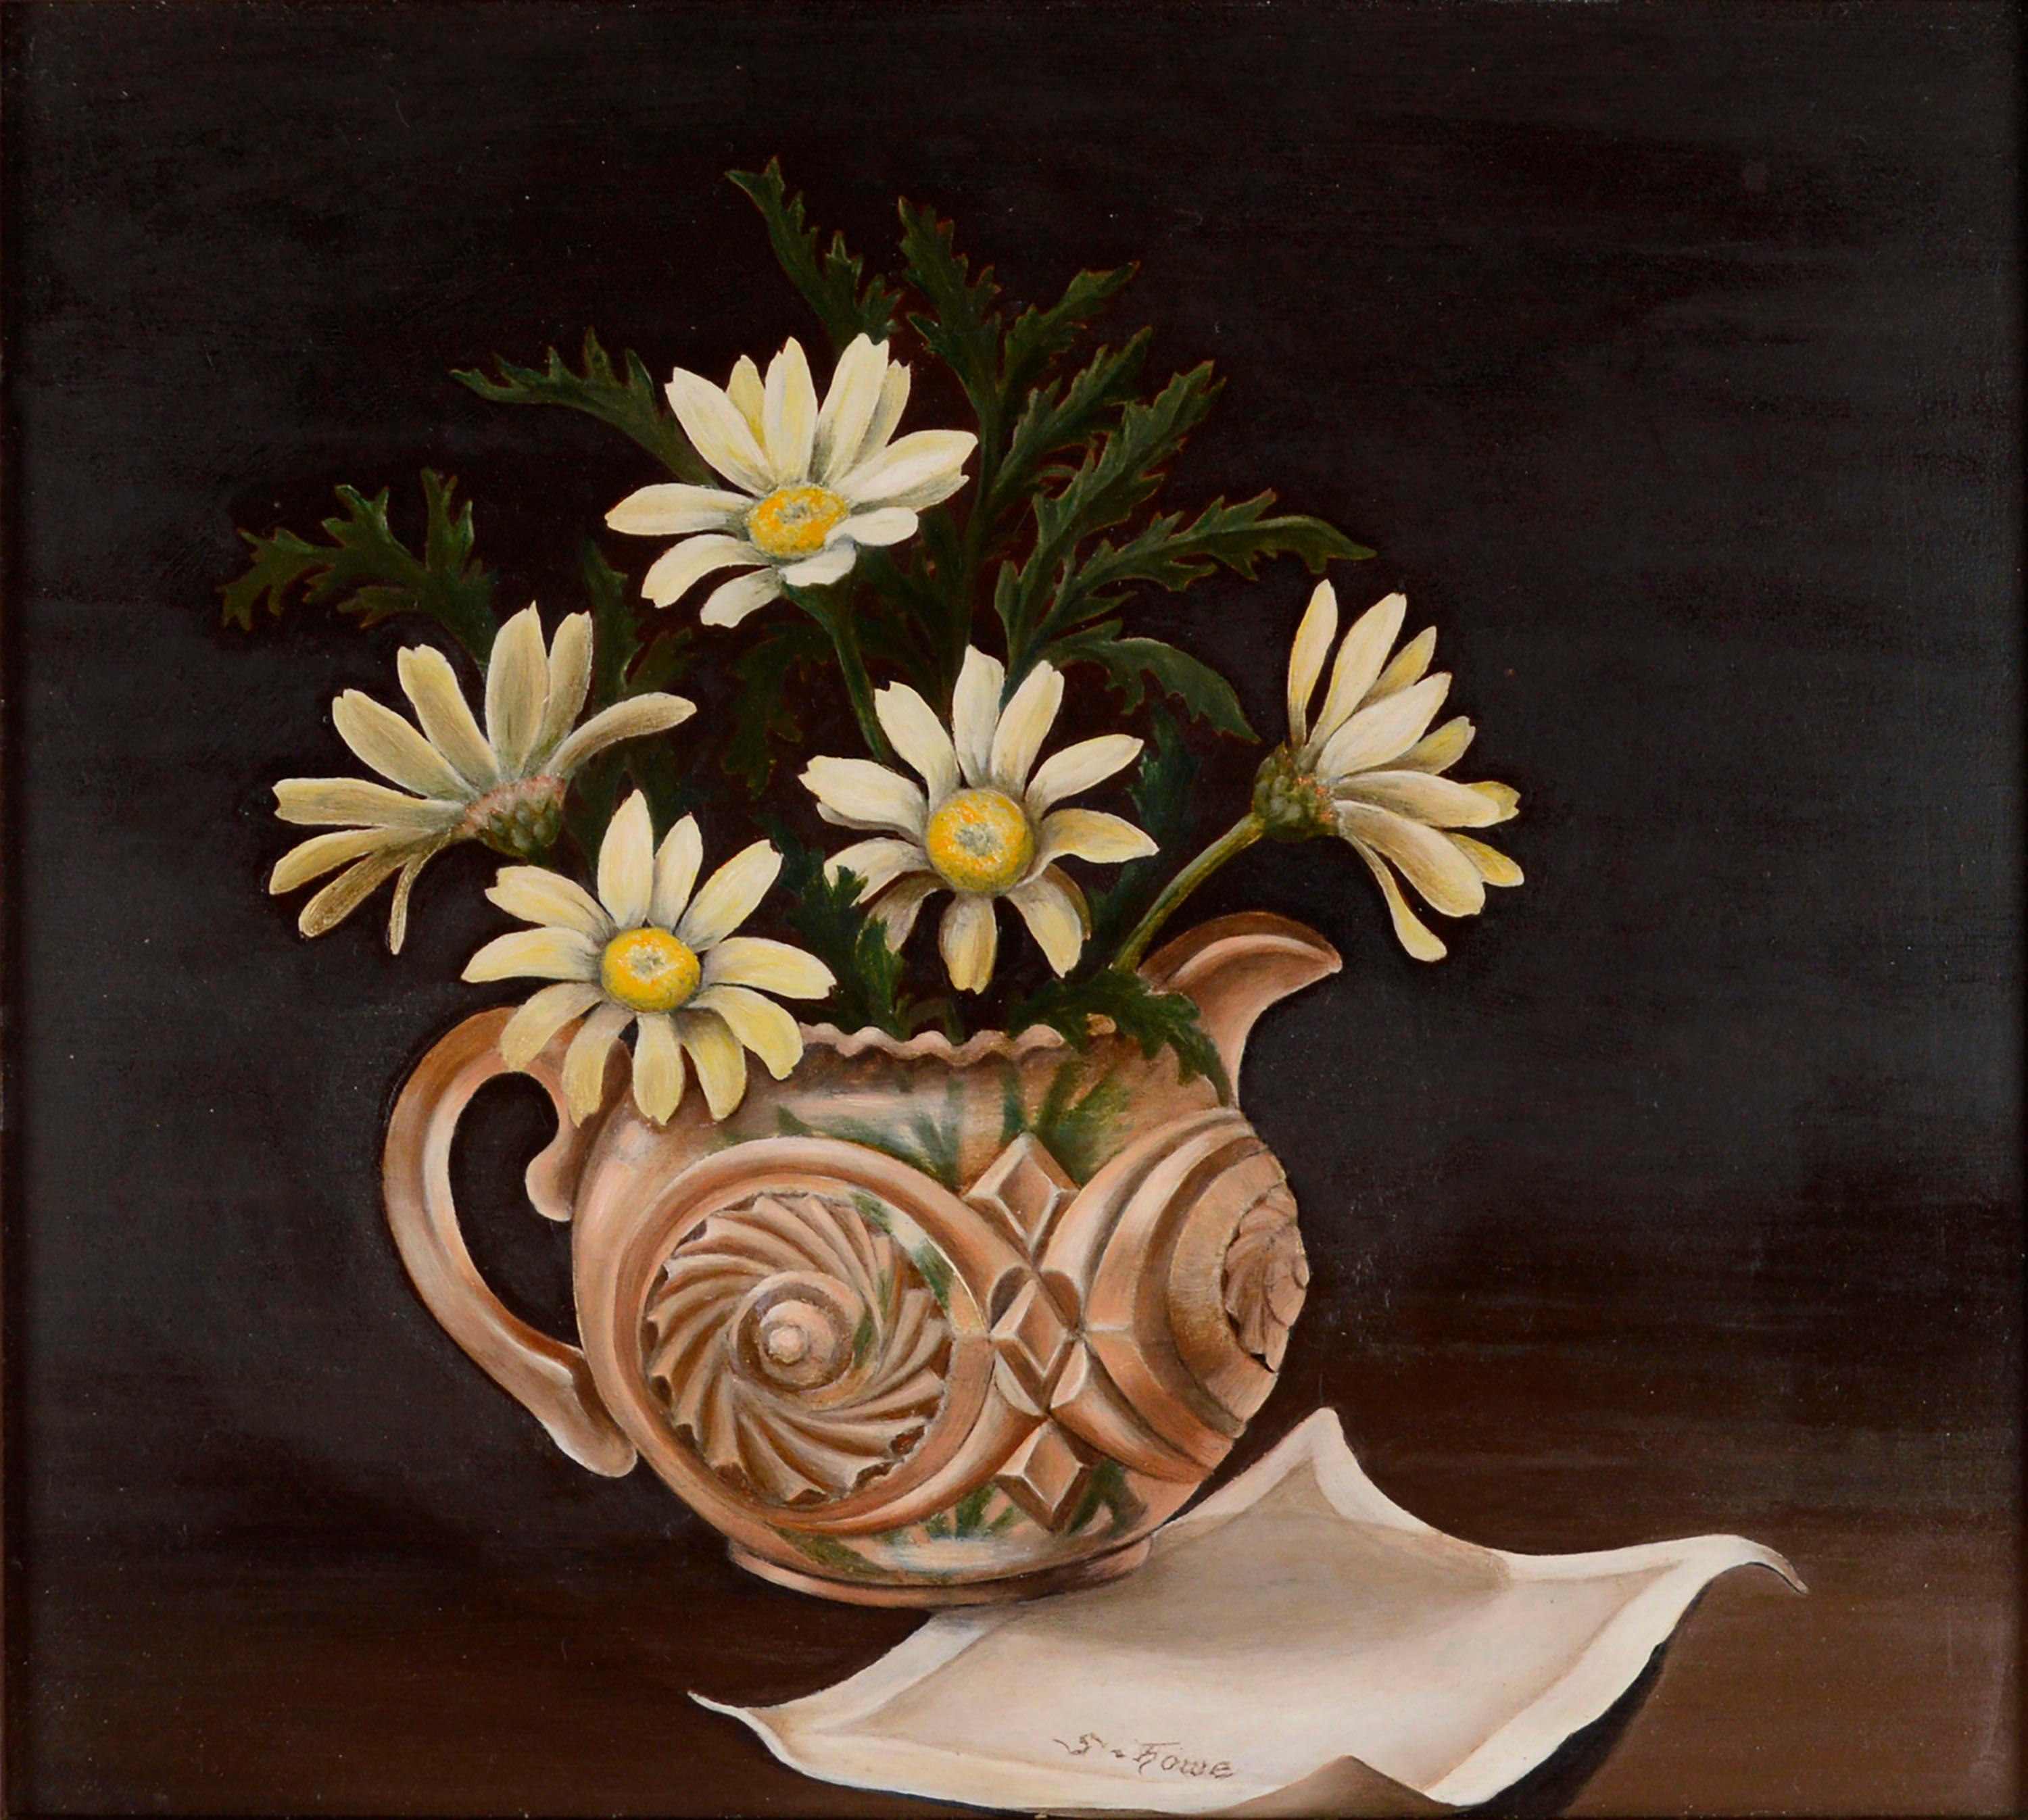 1930s Floral Still-Life with Daisies and Cut Crystal Vase - Painting by S. Howe